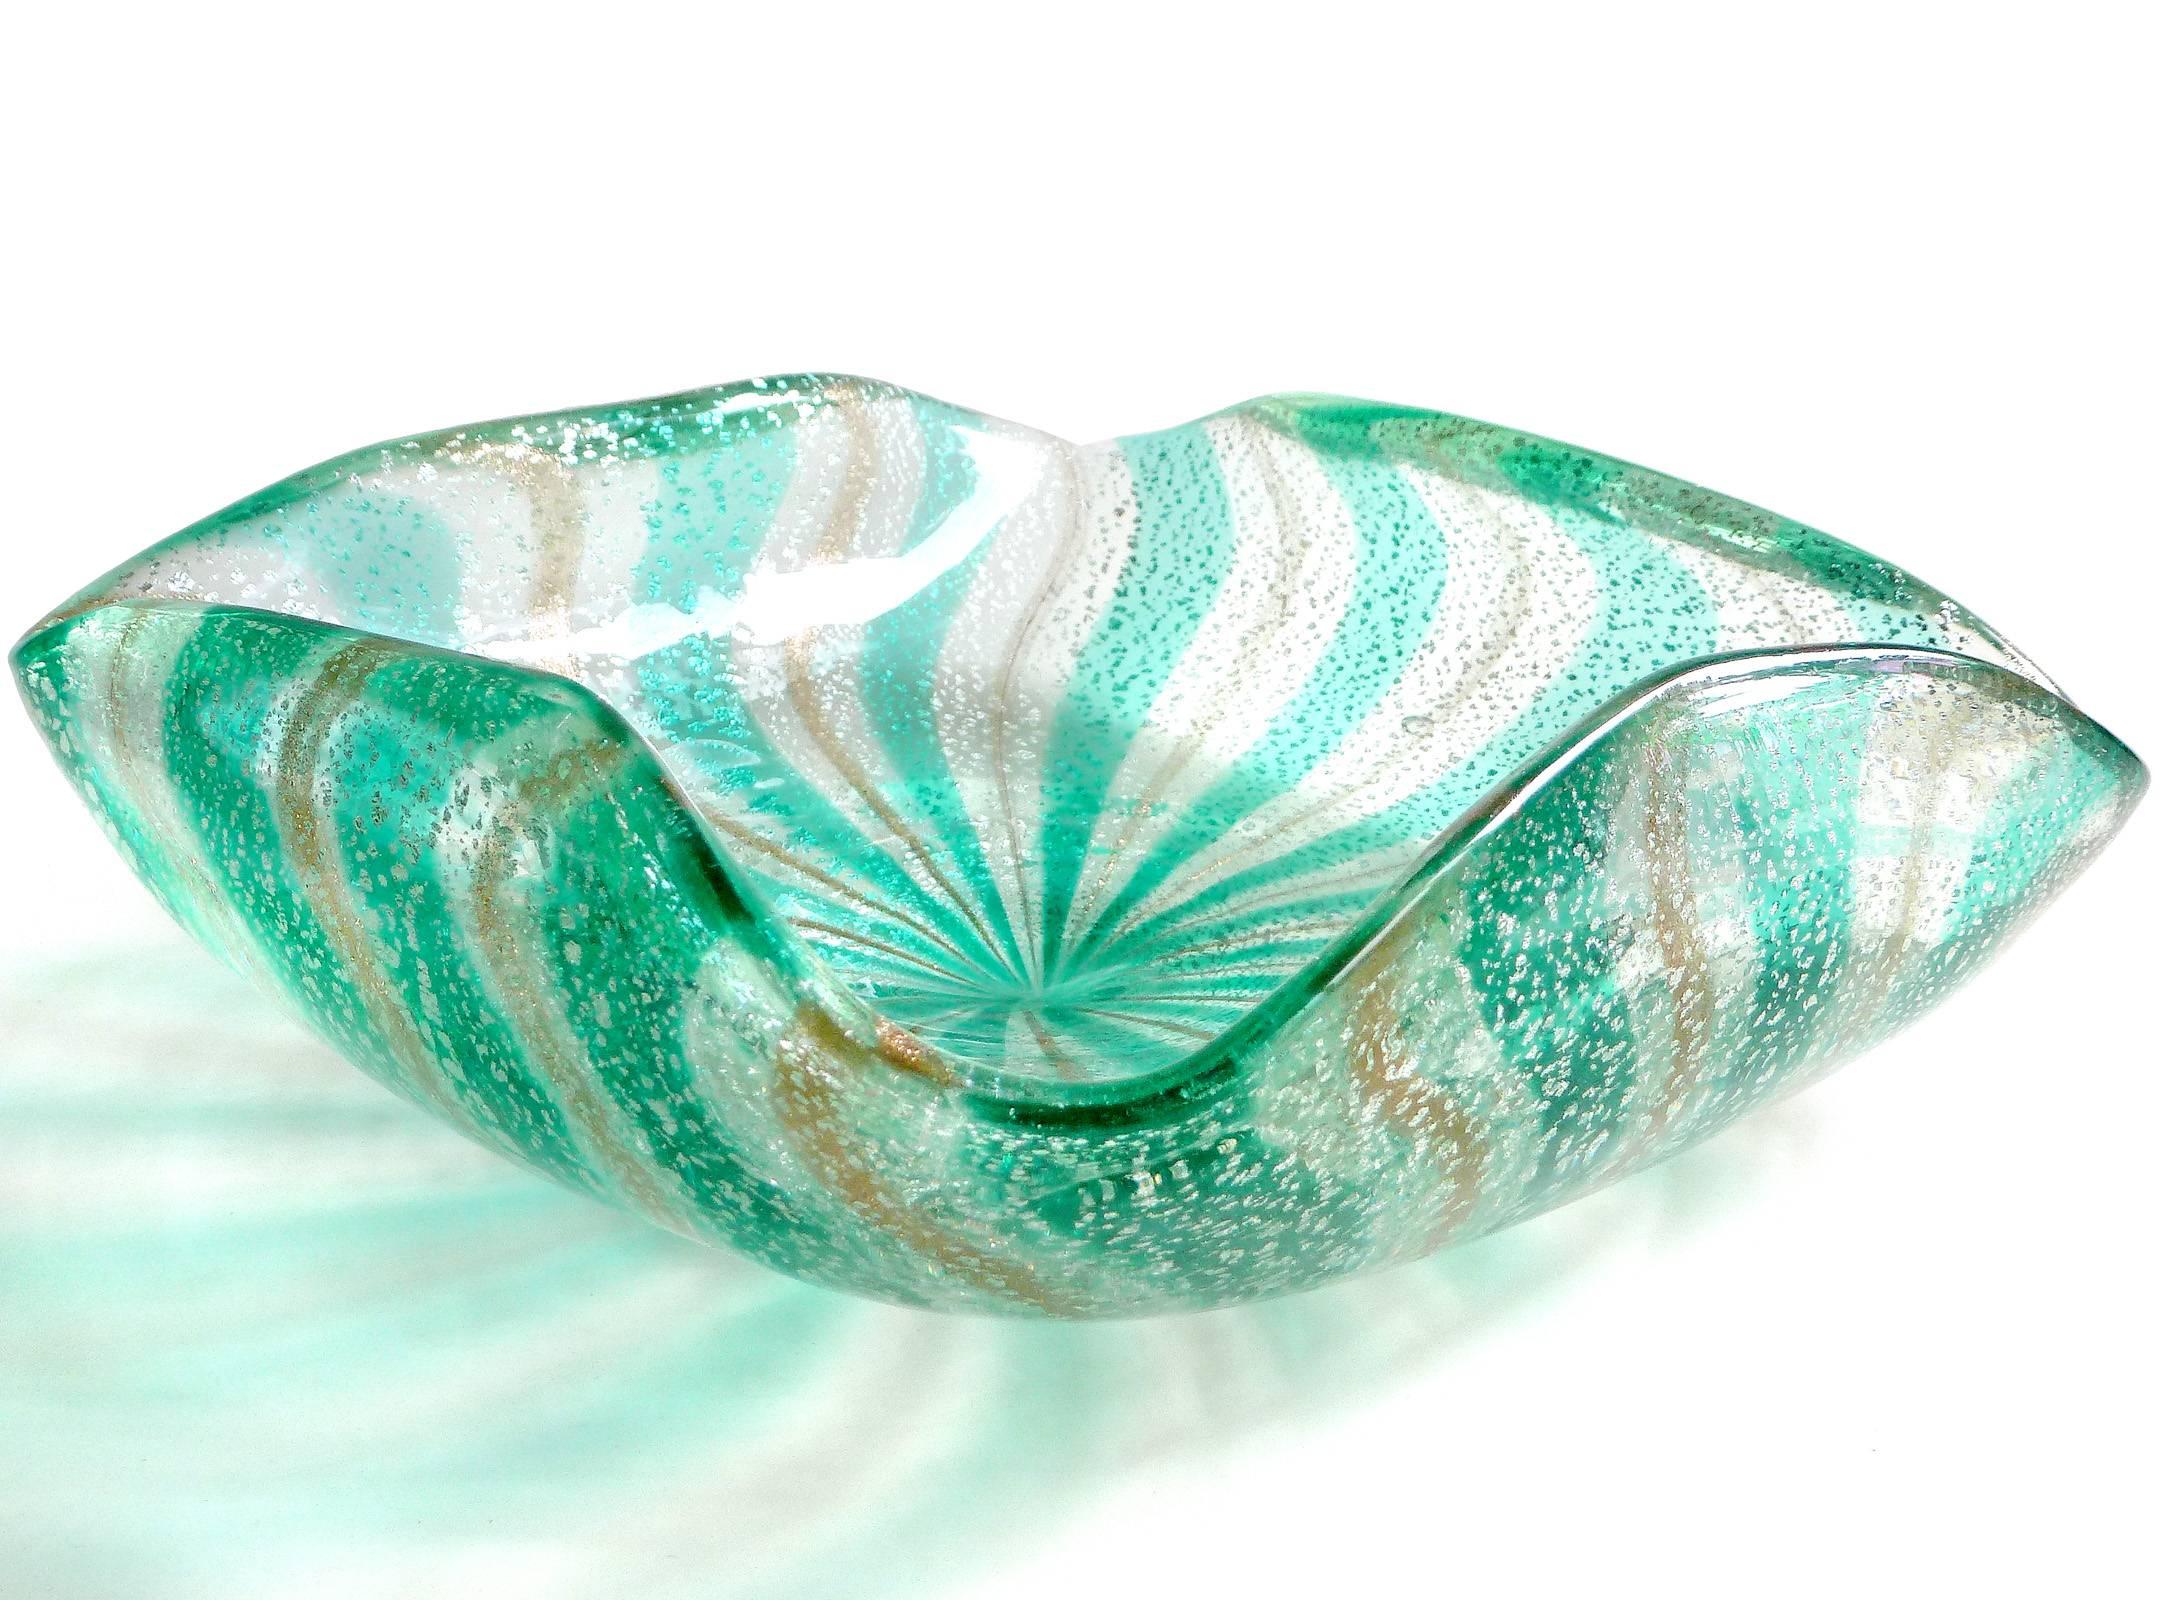 Beautiful vintage Murano hand blown green, copper aventurine and silver flecks Italian art glass bowl. Documented to the A.Ve.M. (Arte Vetraria Muranese) company. The piece has alternating bands of green and acenturine over silver leaf. It has a